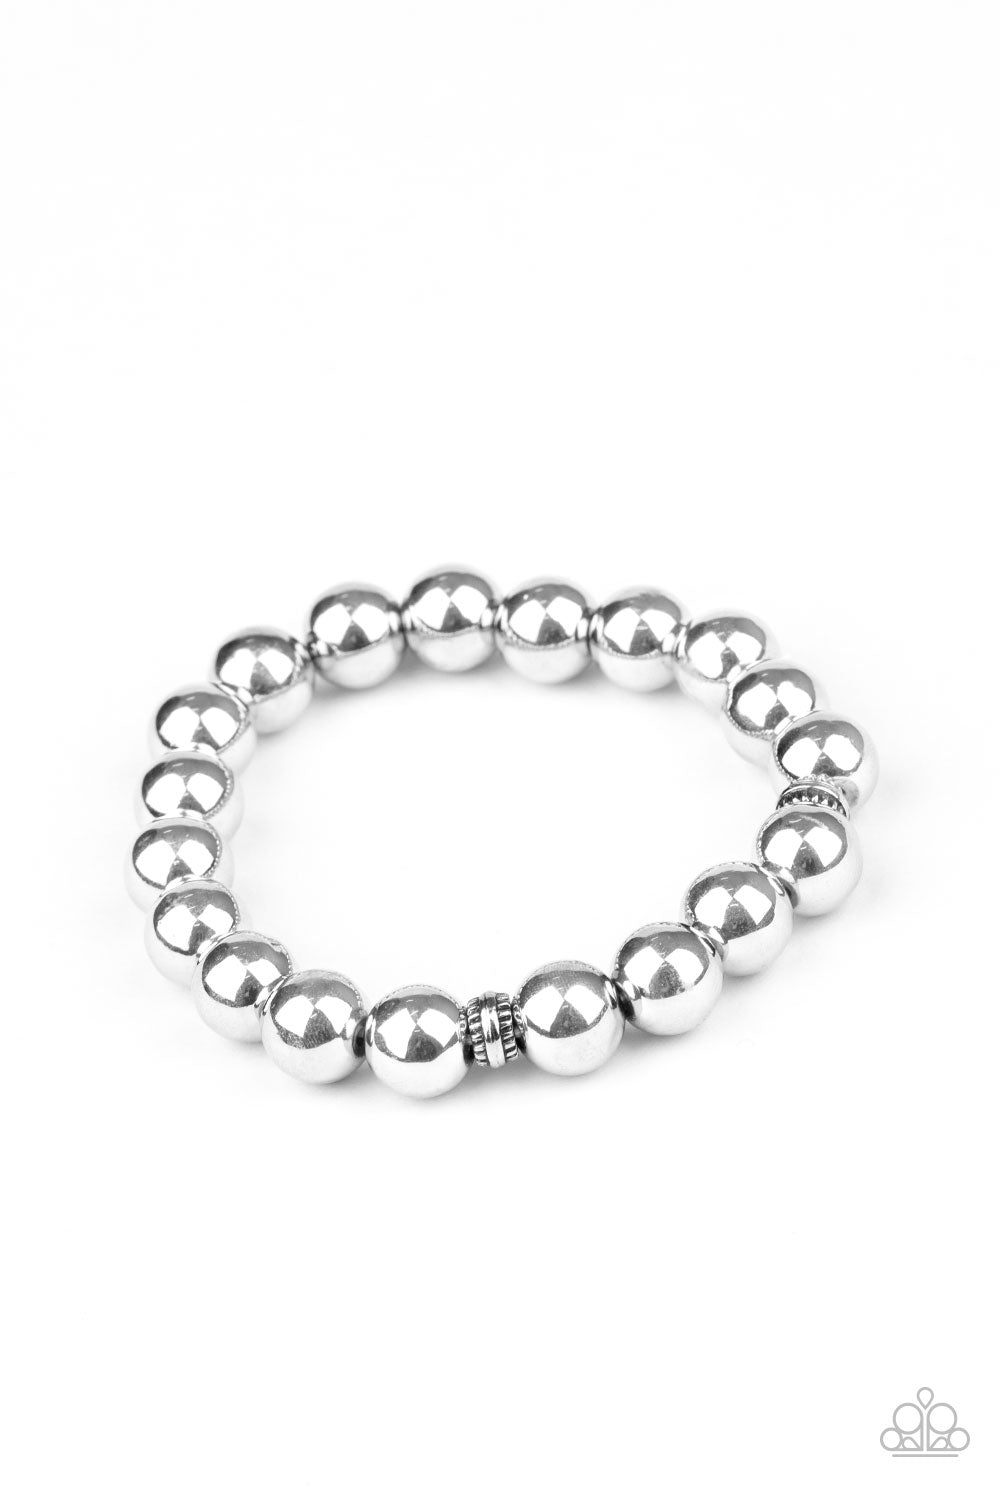 Paparazzi Accessories Resilience - Silver Urban Stretchy Band Bracelets - Lady T Accessories